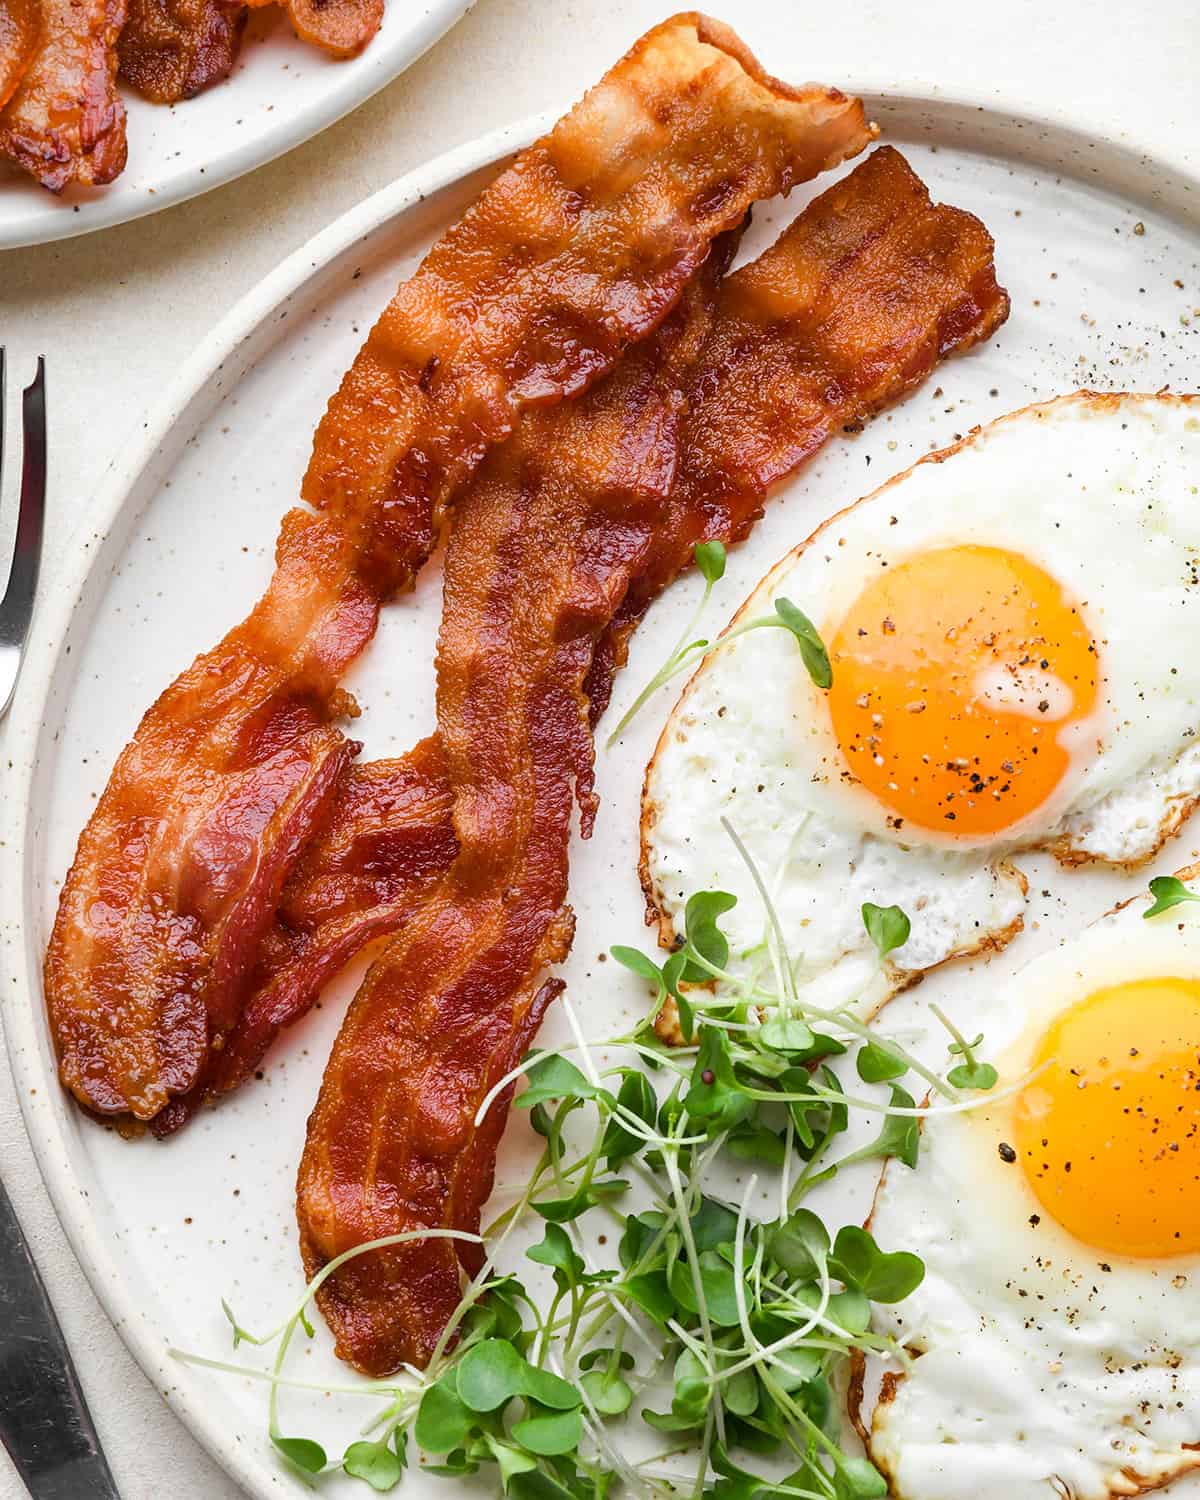 Oven Baked Bacon on a plate with fried eggs and greens